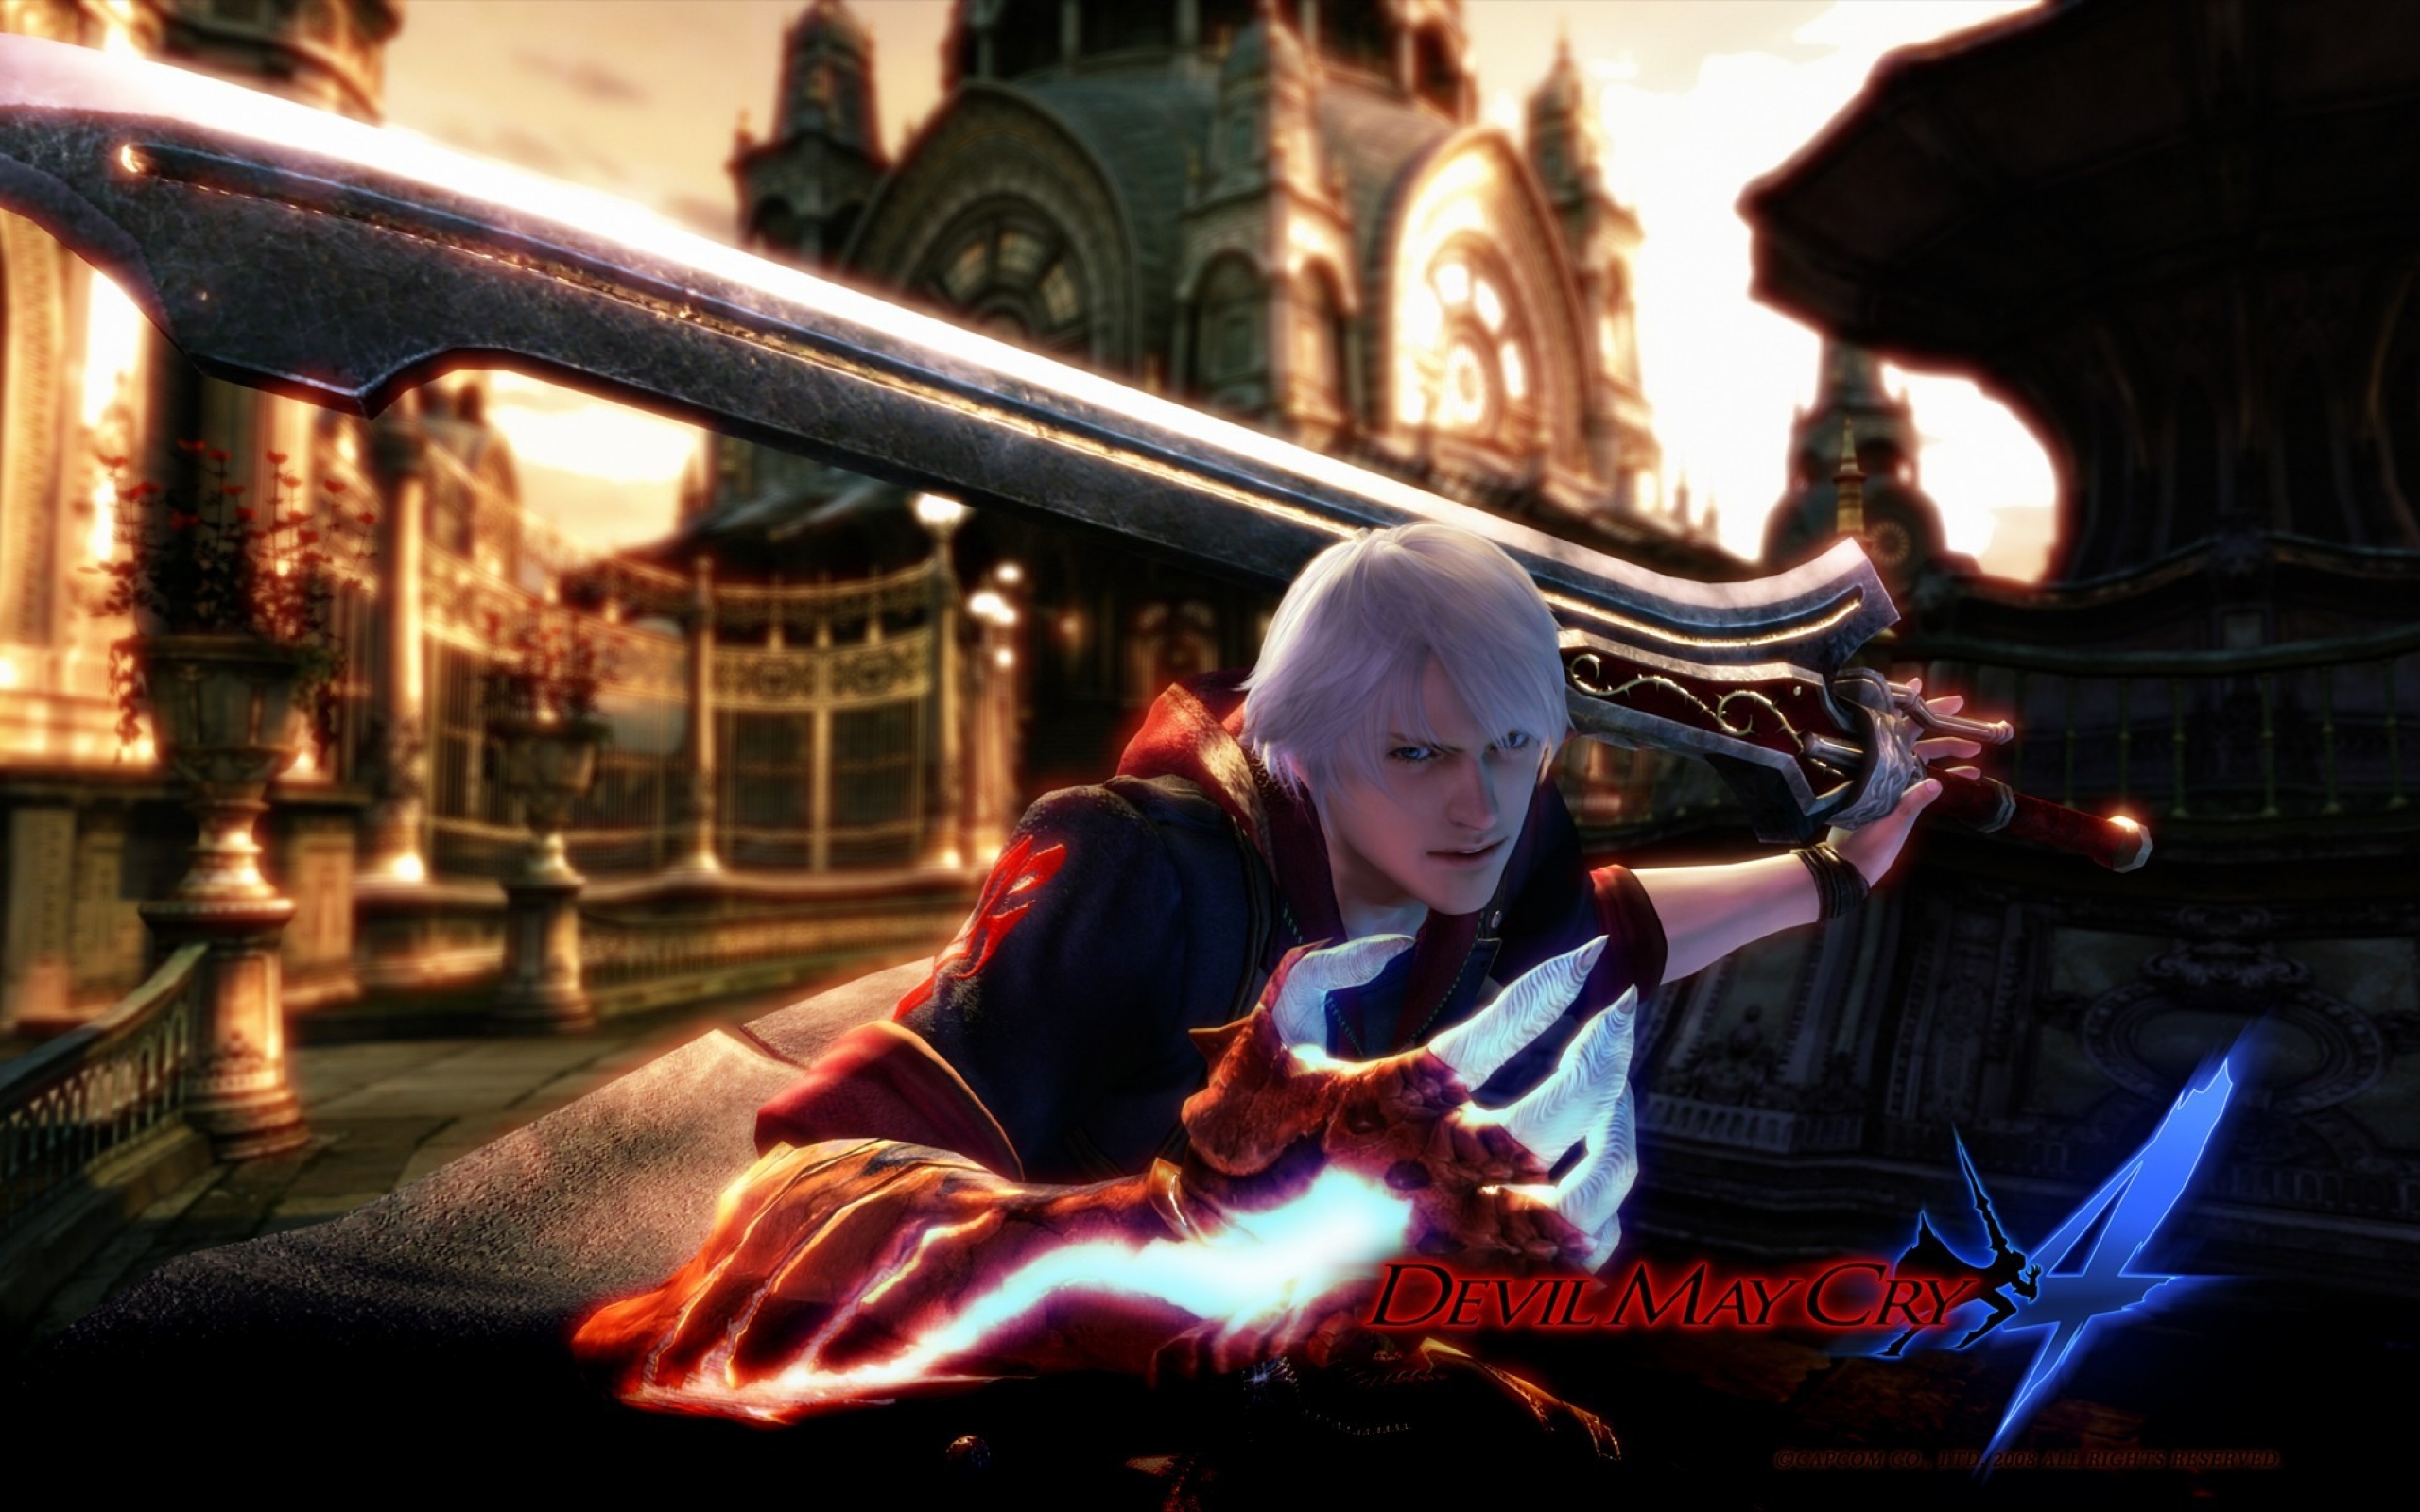 Devil May Cry 4 wallpapers | Devil May Cry 4 stock photos